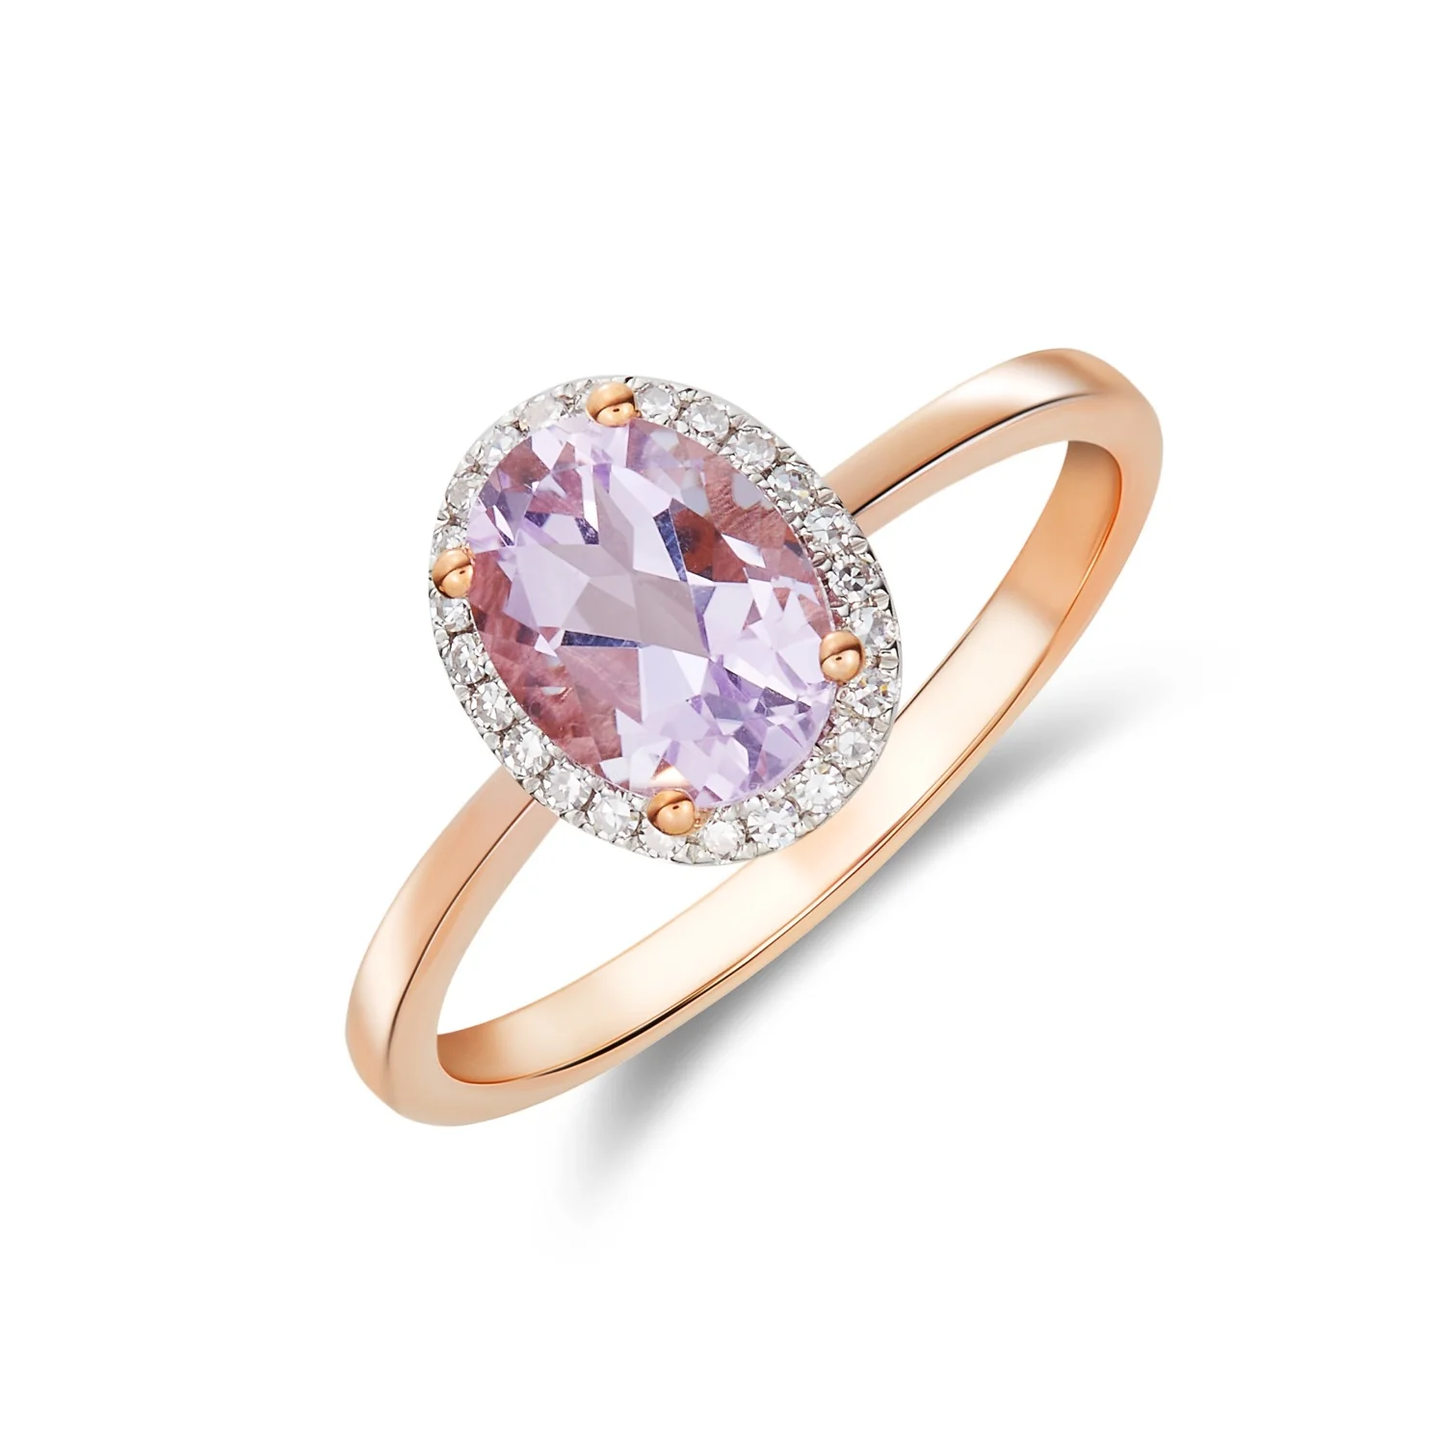 Oval Pink Amethyst & Diamond Cluster Ring Small in 9ct Rose Gold